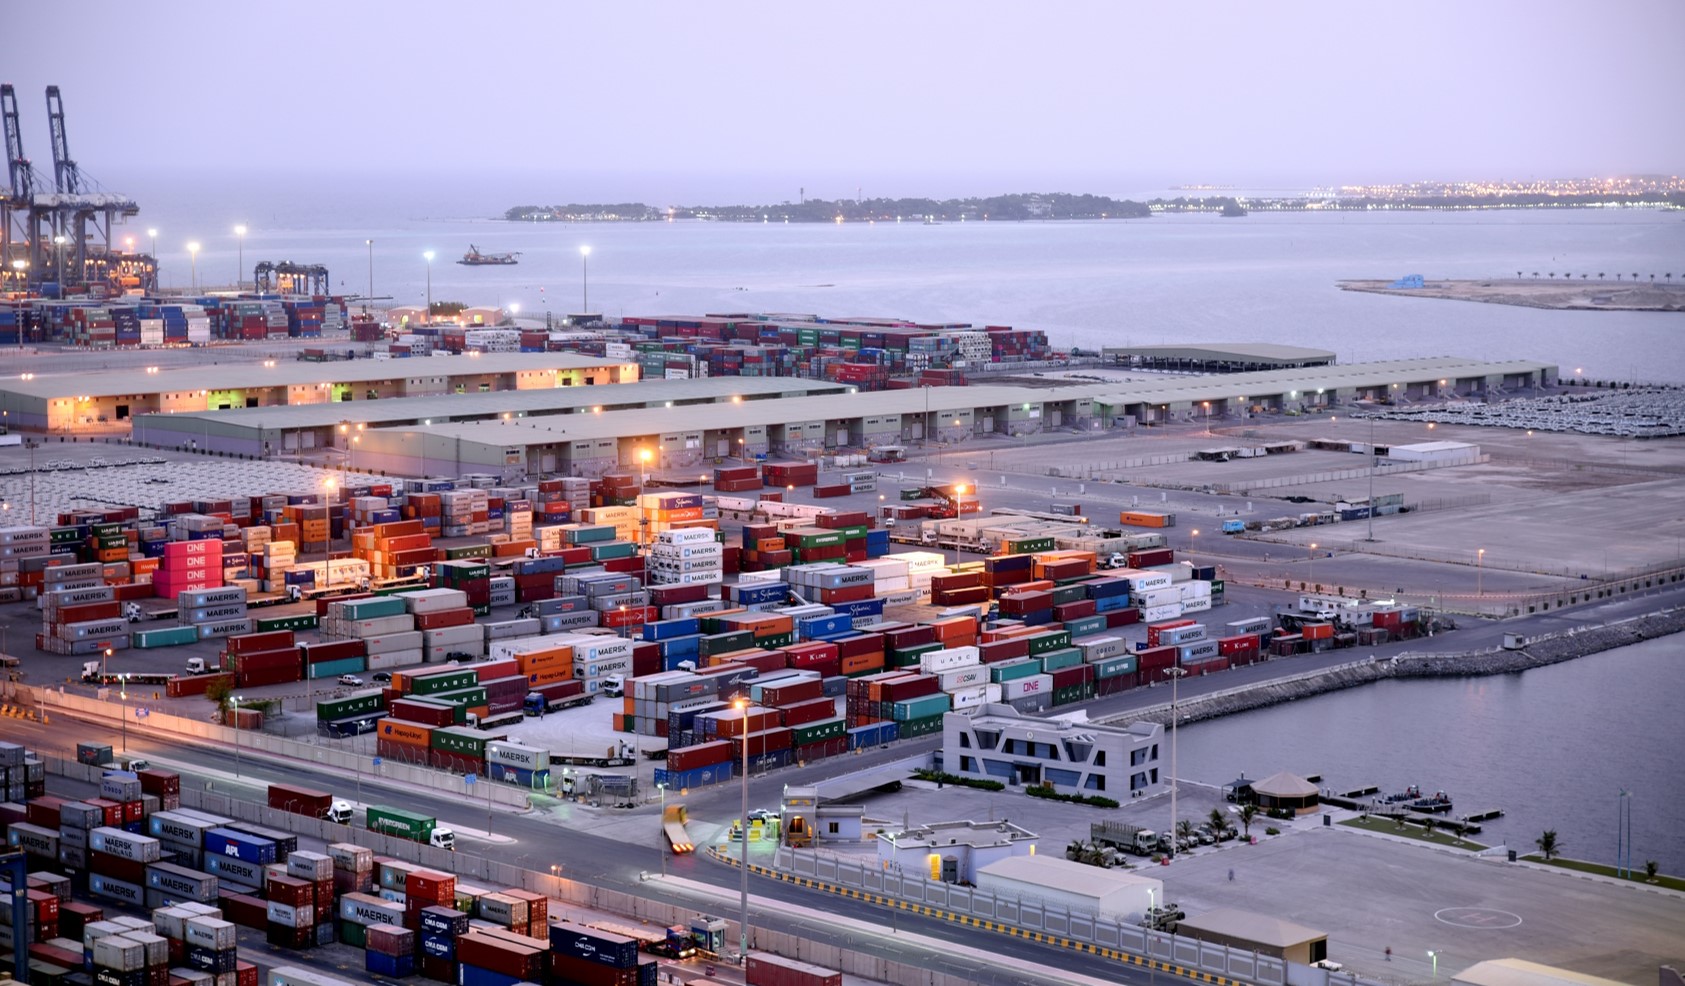 eBlue_economy_A new shipping line in cooperation with_MSC_ company in Jeddah Islamic Port